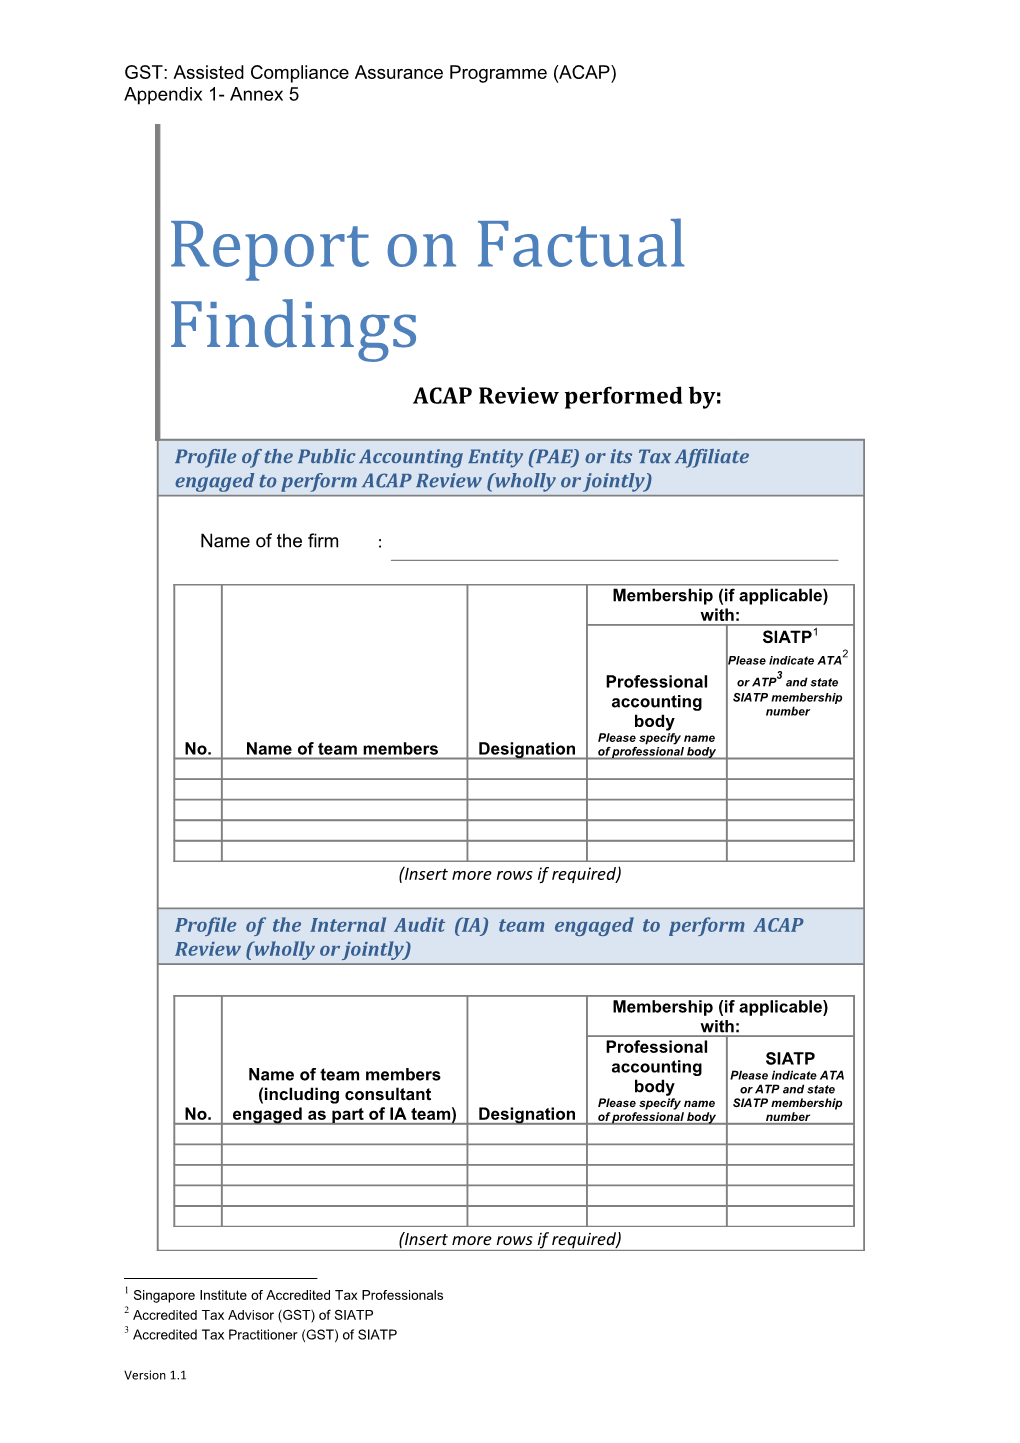 Report on Factual Findings